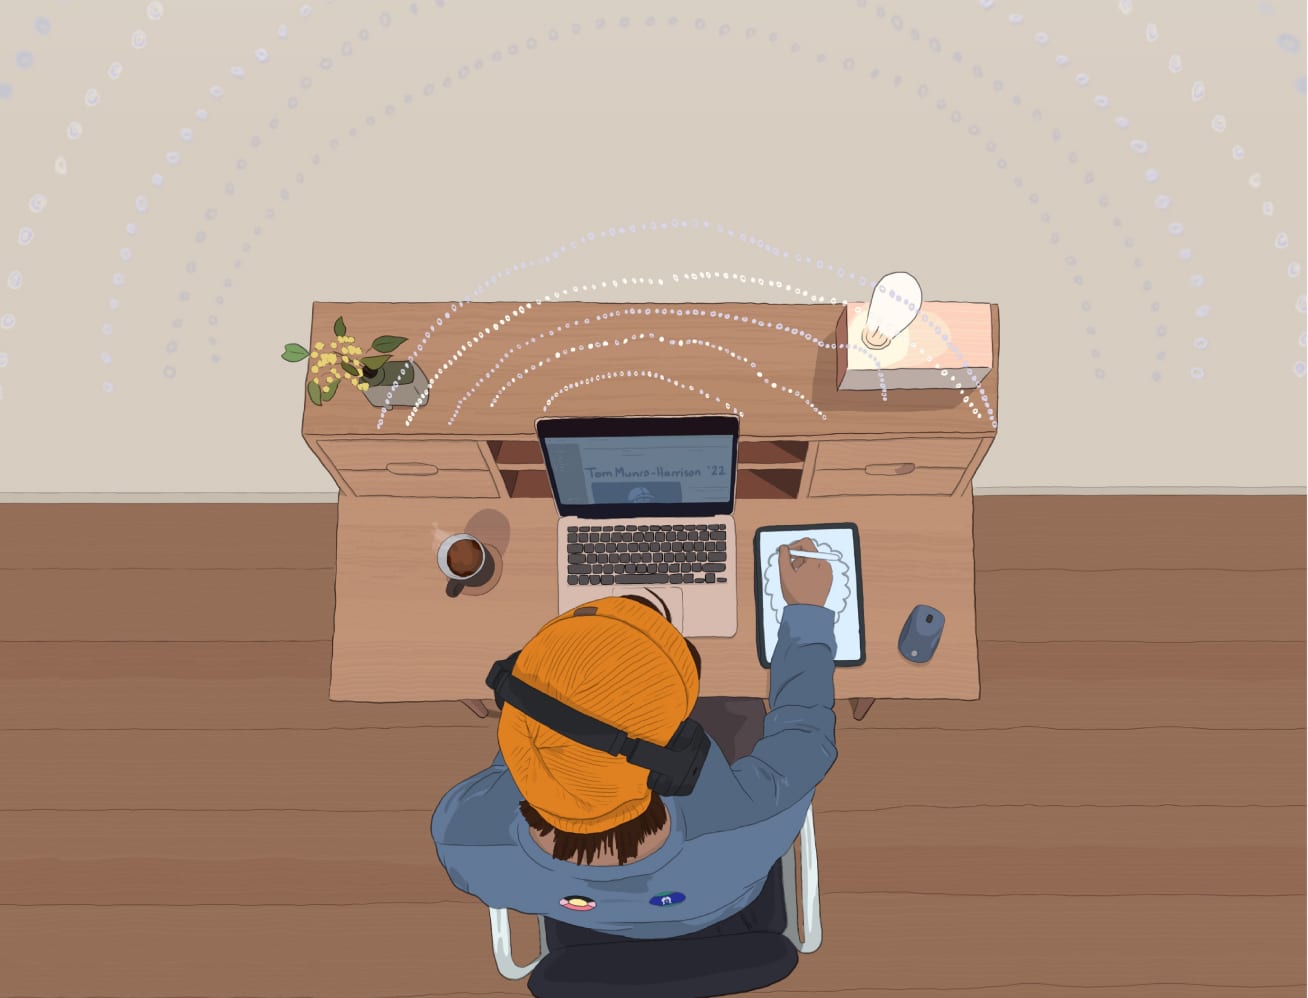 Illustration of a person sitting at a desk drawing on their tablet